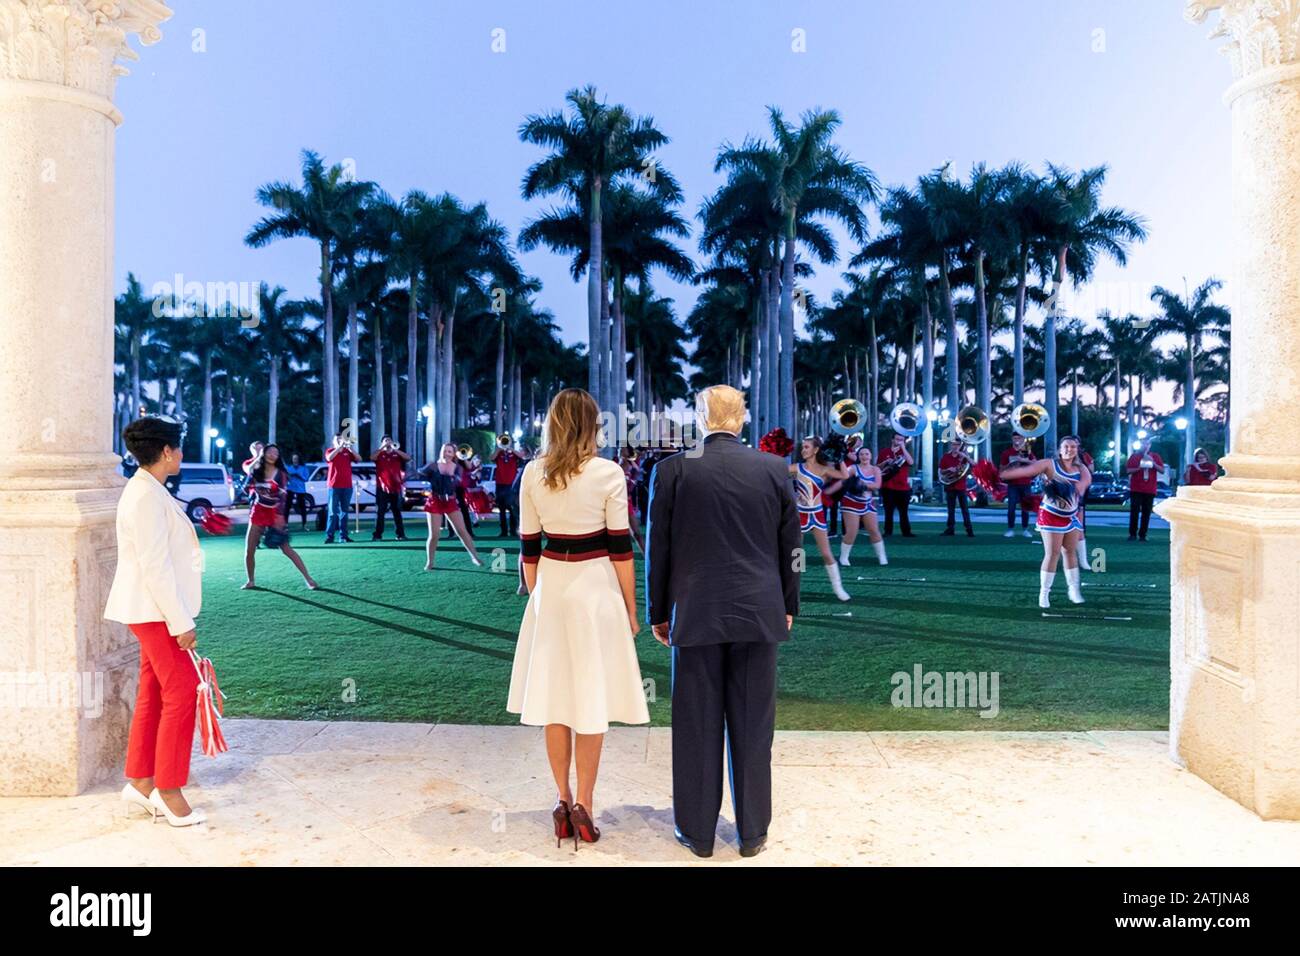 West Palm Beach, United States of America. 02 February, 2020. U.S President Donald Trump and First Lady Melania Trump are entertained by members of the Florida Atlantic University marching band prior to attending a Super Bowl party outside the Trump International Golf Club February 2, 2020 in West Palm Beach, Florida. Credit: Shealah Craighead/White House Photo/Alamy Live News Stock Photo